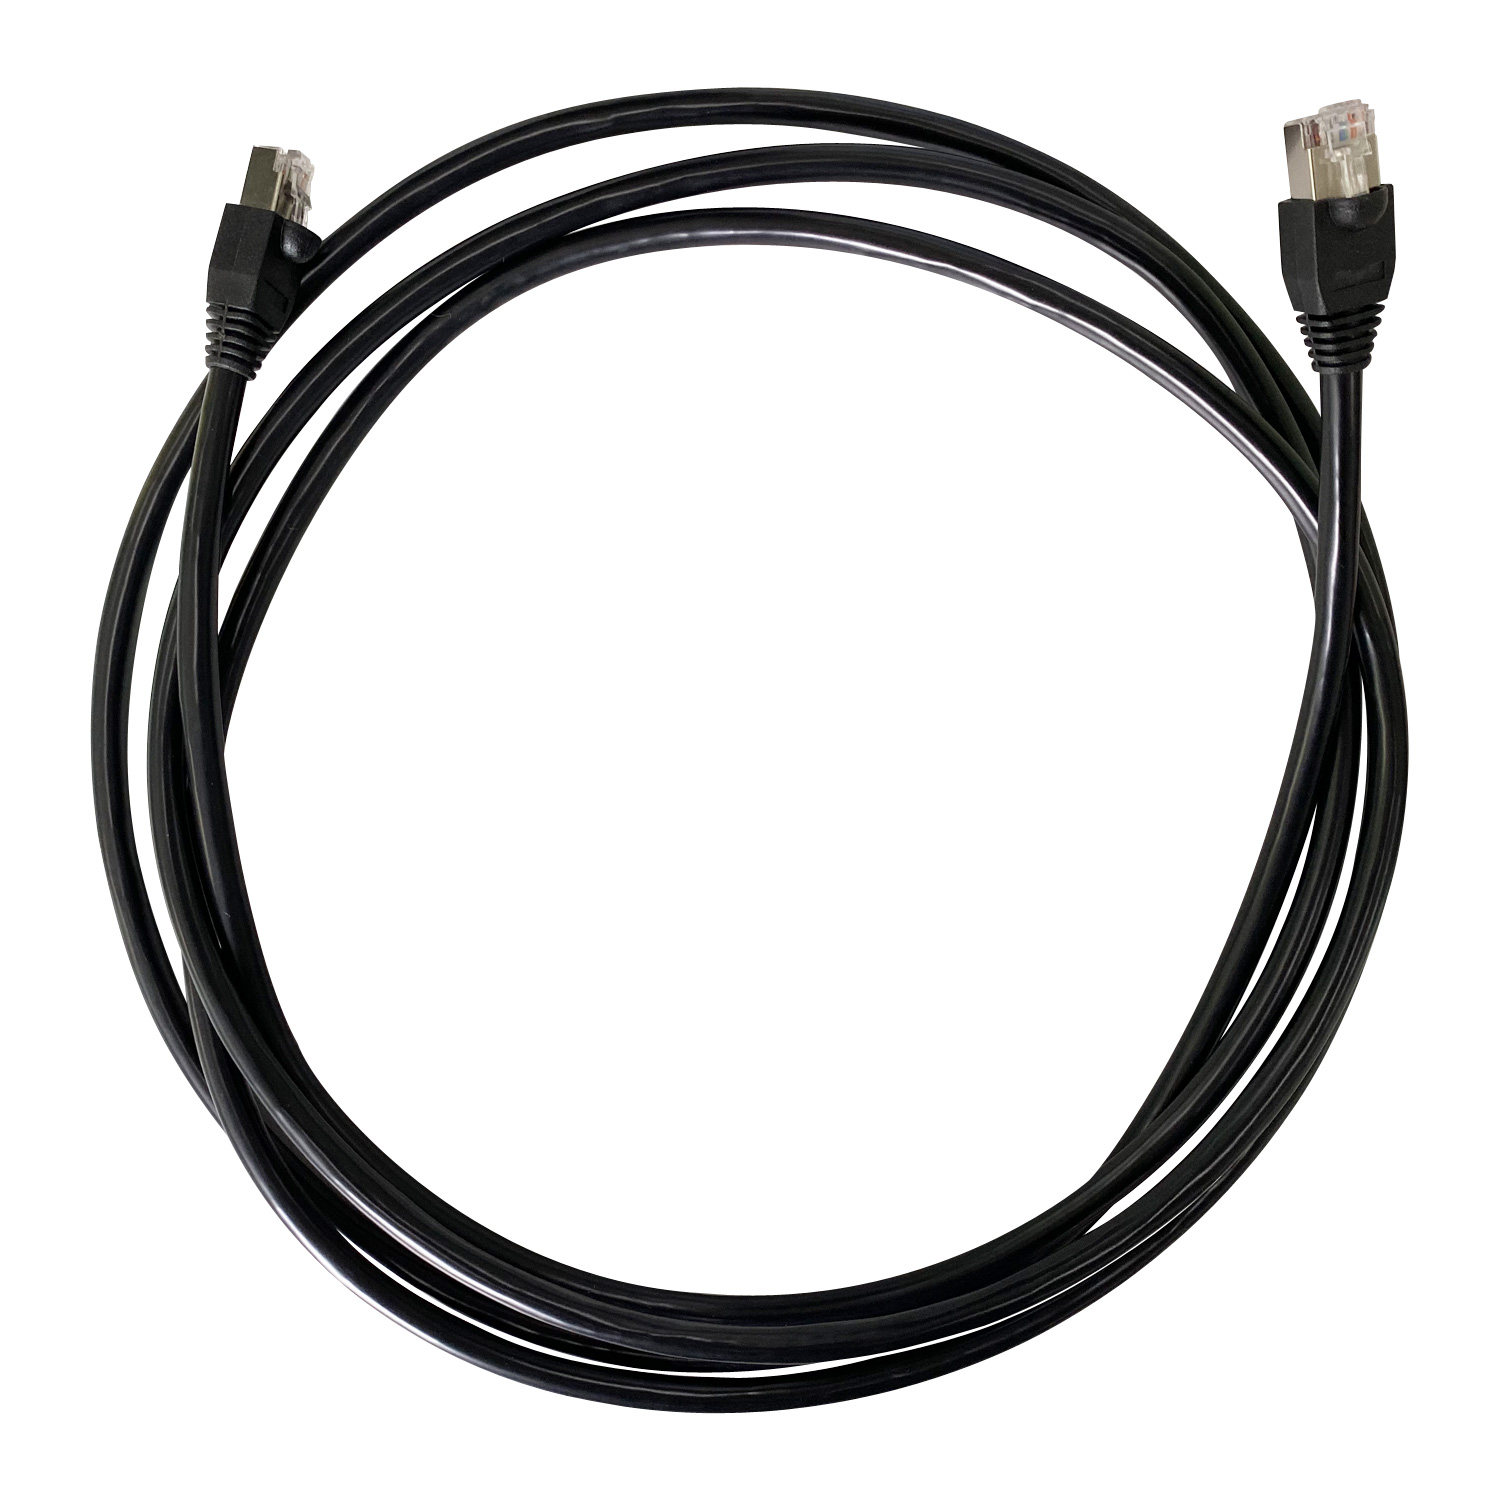 CAT5e Networking Cable Assembly UTP FTP with RJ45 Connector 